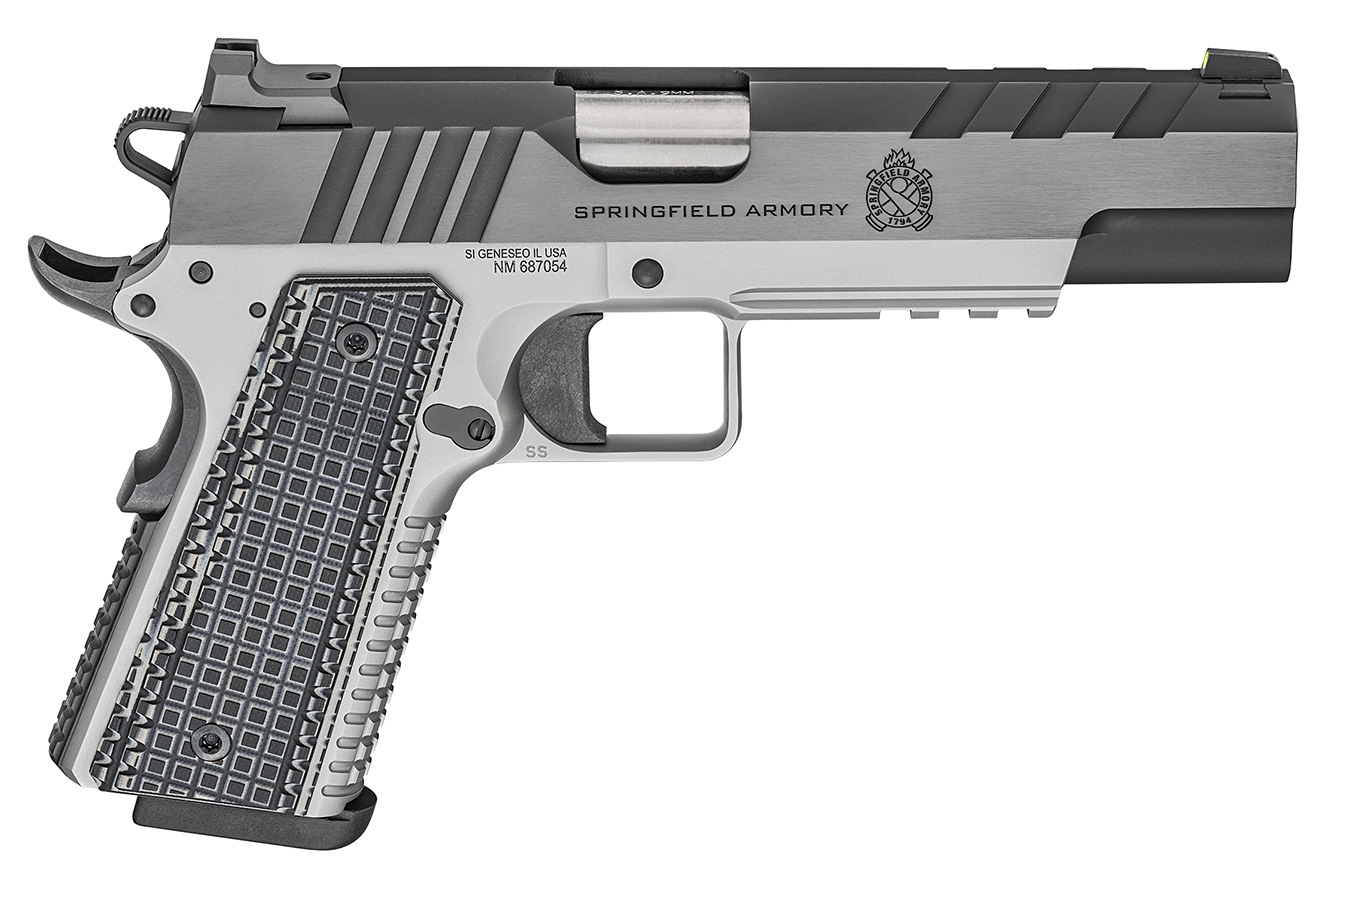 1911 EMISSARY 9MM FULL-SIZE PISTOL WITH STAINLESS FINISH AND G10 GRIPS